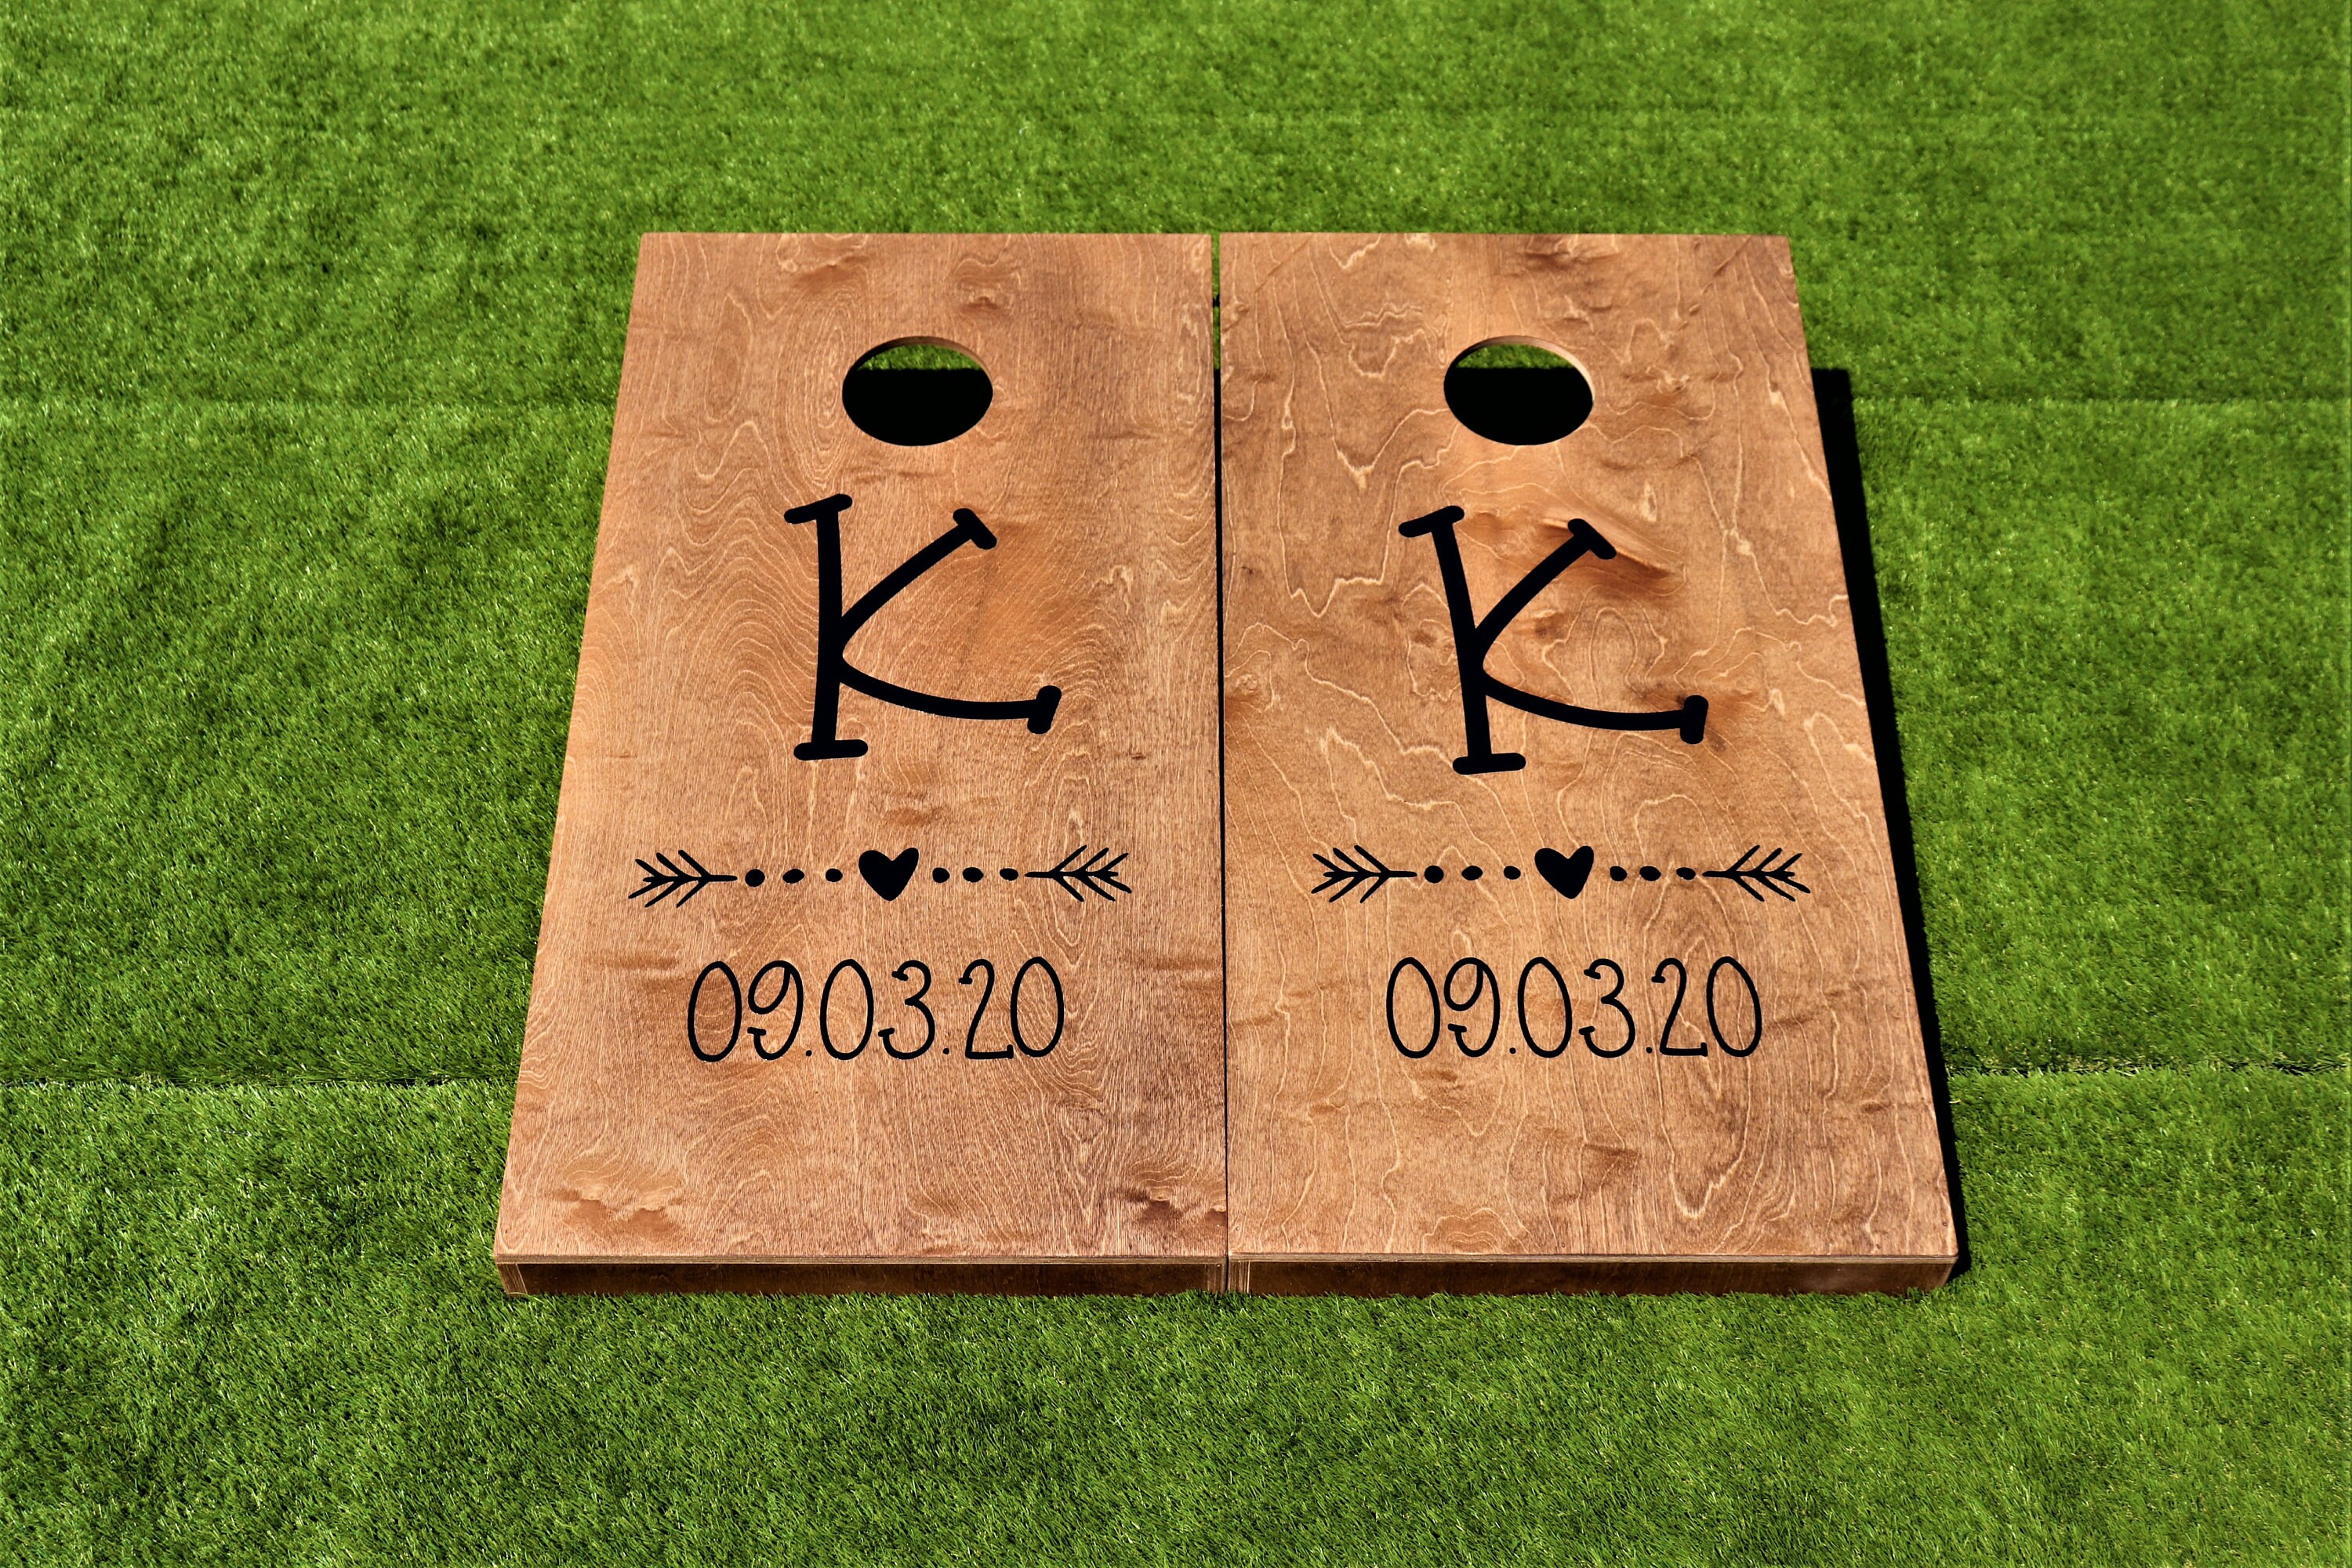 High Quality boards includes 8 bags Details about   Anniversary/Wedding cornhole board set 